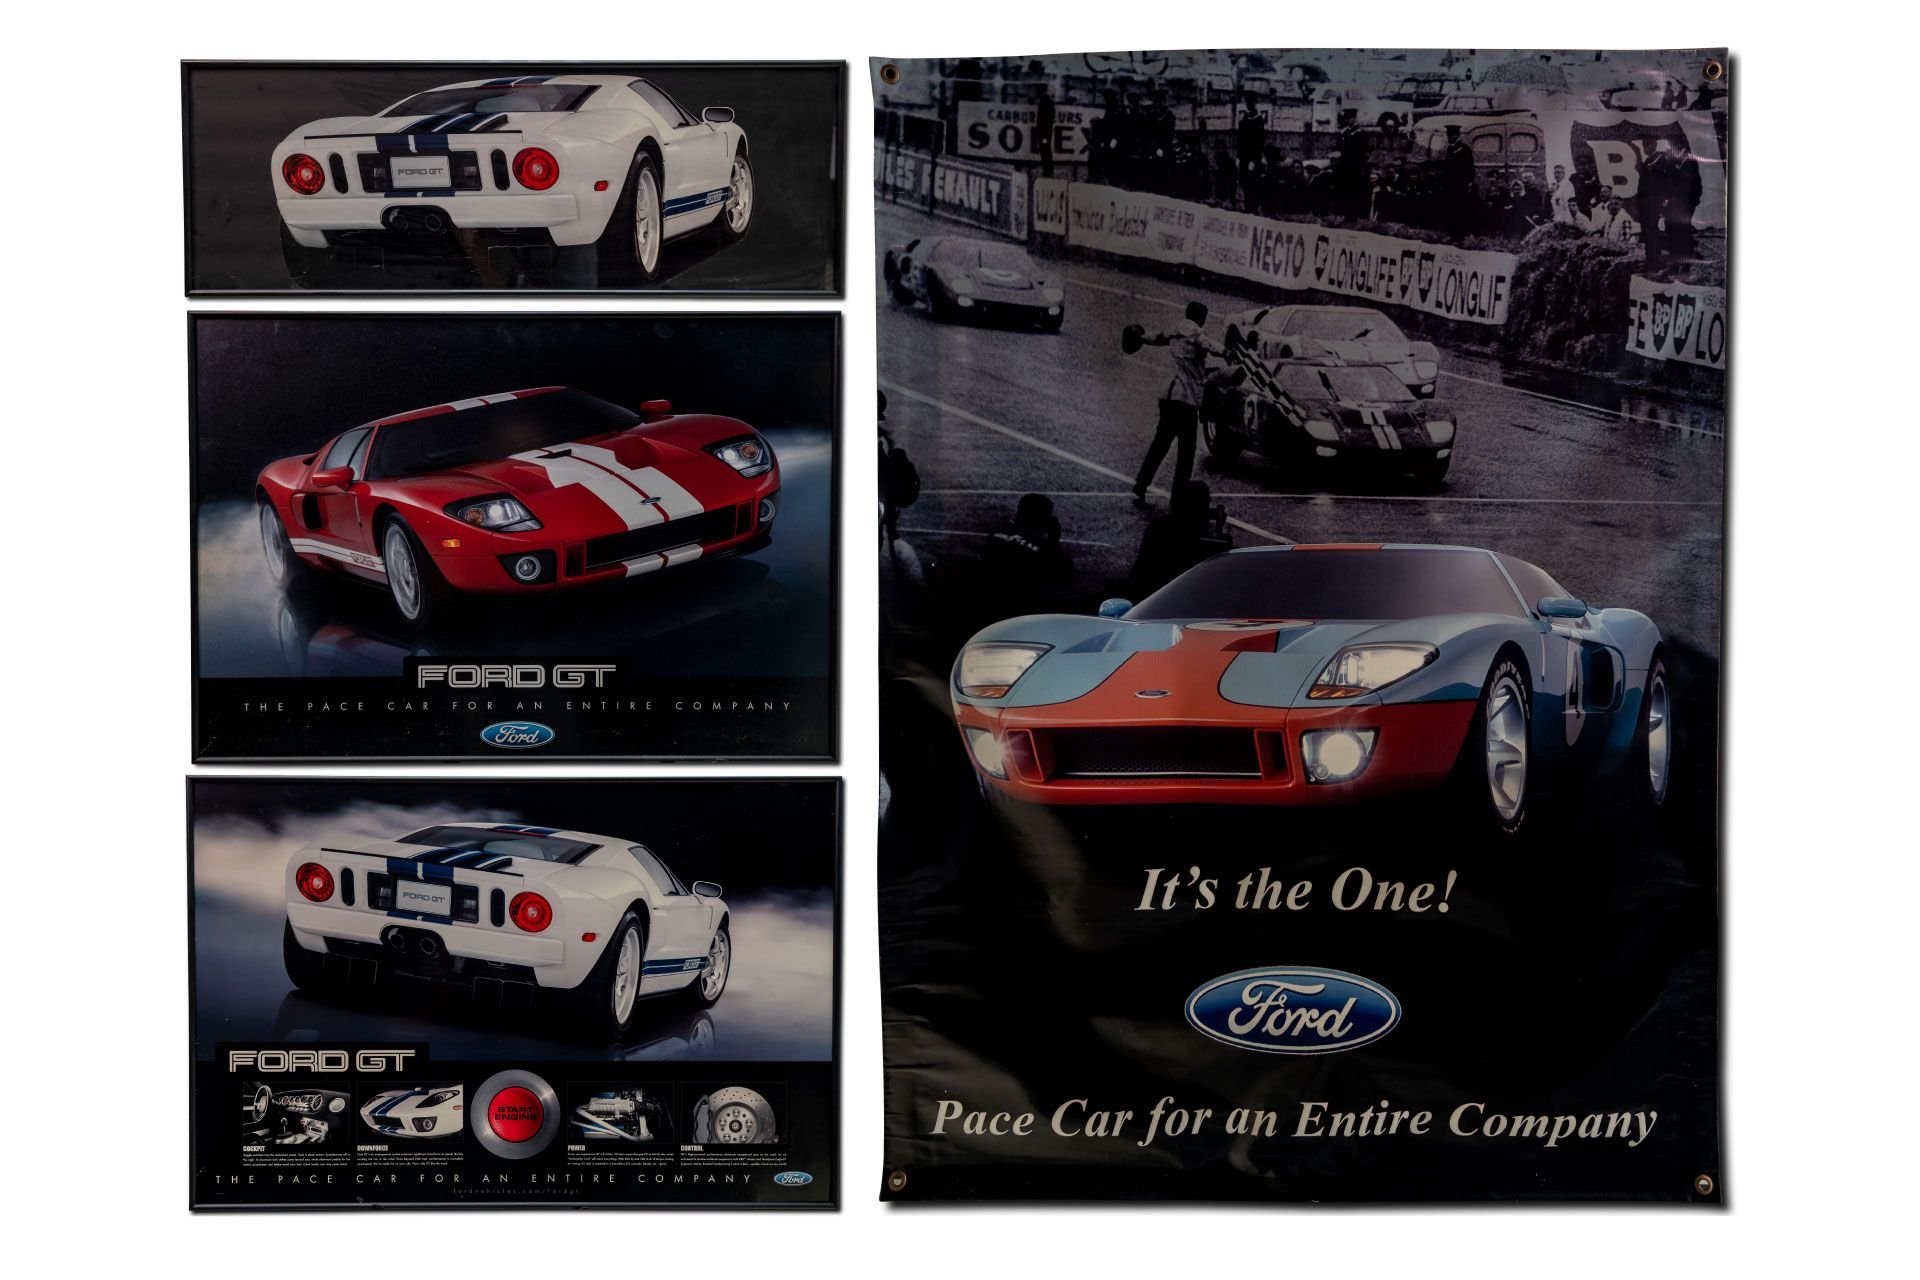 For Sale Group of Framed '2005/06 Ford GT' Promotional Posters and a Ford Vinyl Banner